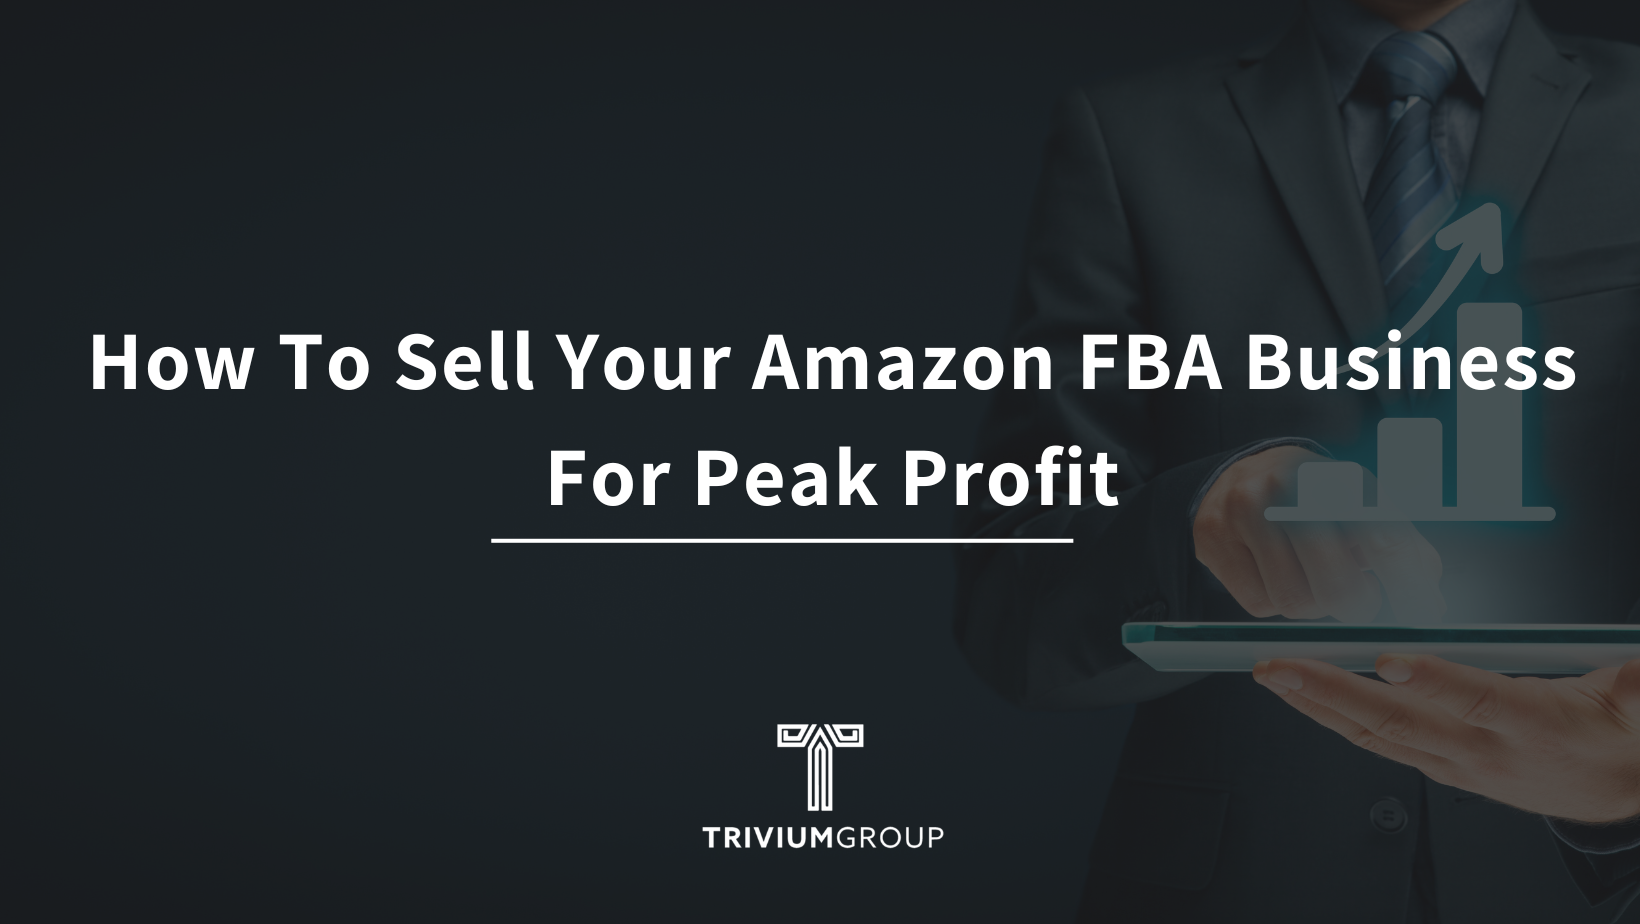 How To Sell Your Amazon FBA Business For Peak Profit